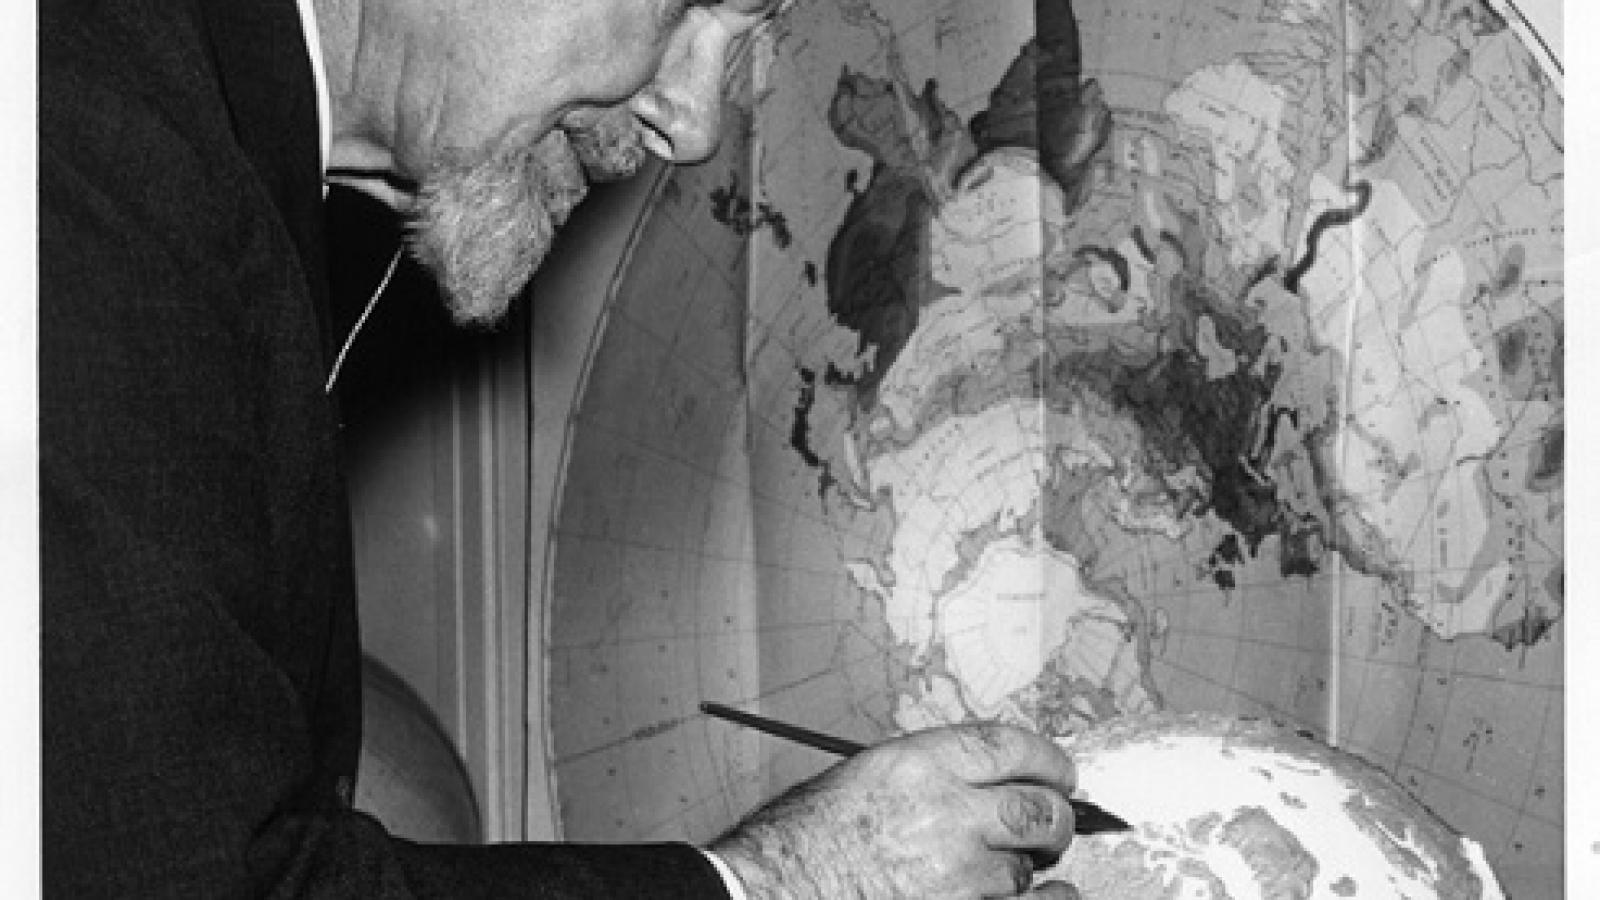 Wilkins drawing a point on a map